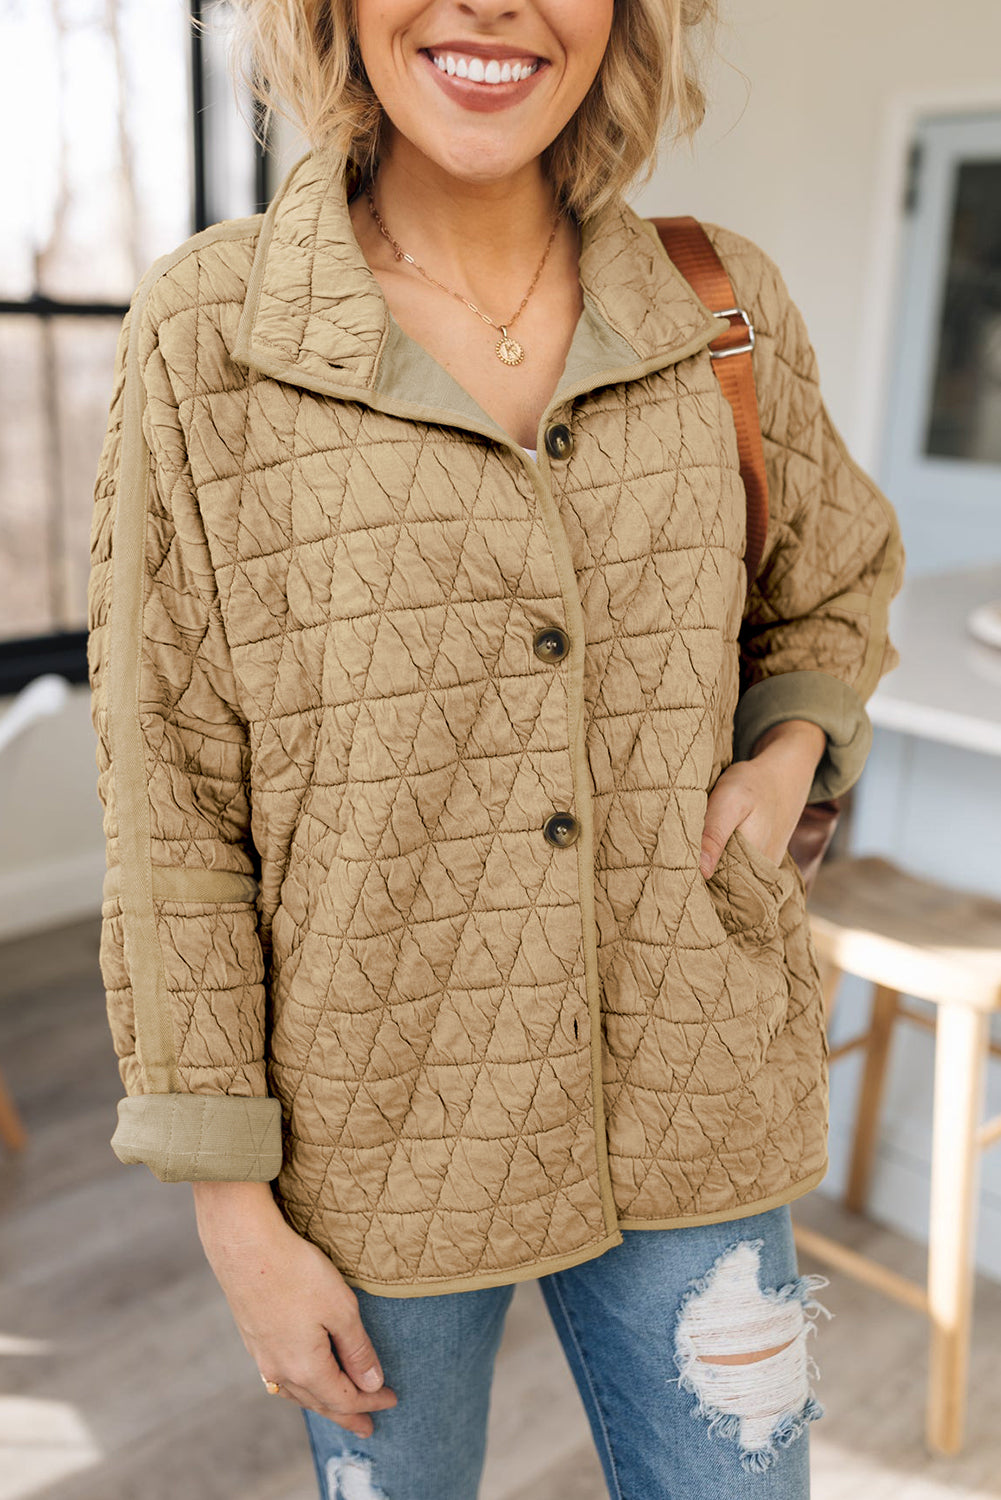 Khaki/Shacket 95%Polyester+5%Elastane Solid Quilted Pullover and Pants Outfit Set, Shirt, or Hoodie- various colors - women's pants set at TFC&H Co.